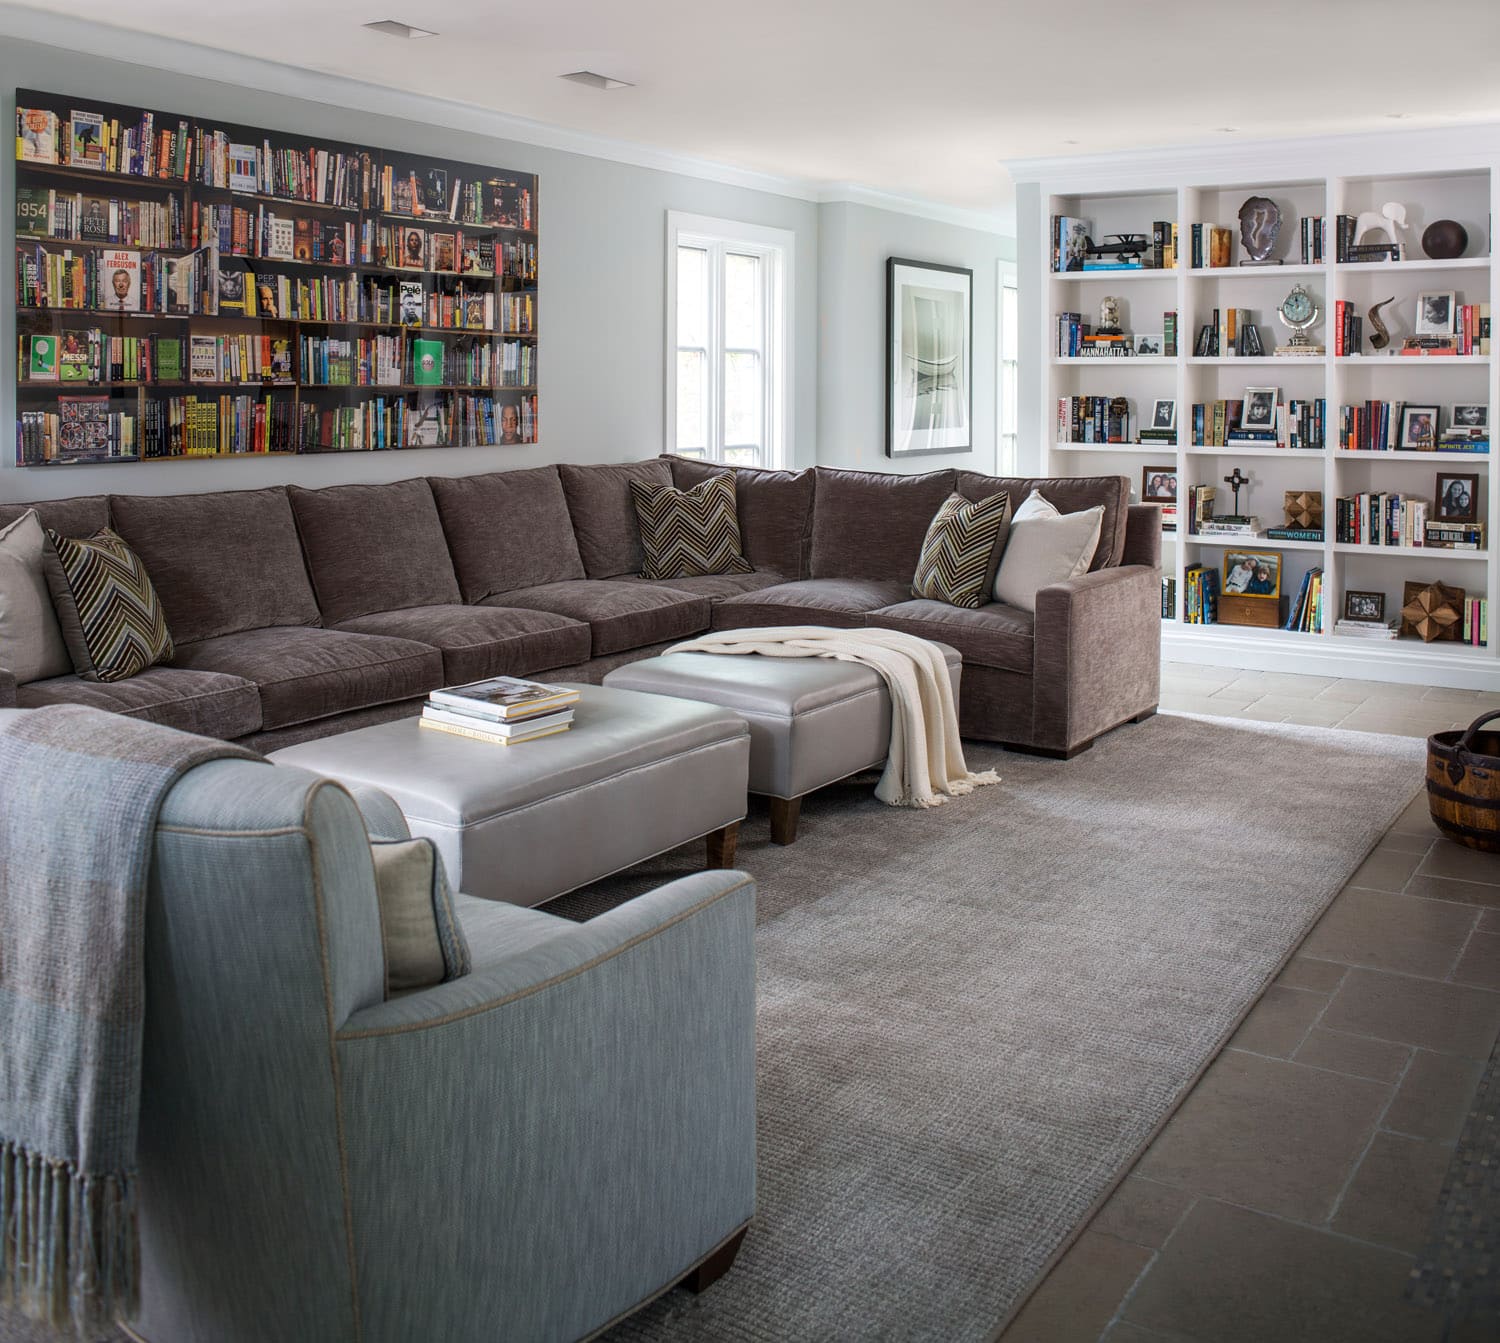 Cozy living room with sectional sofa and bookshelves.